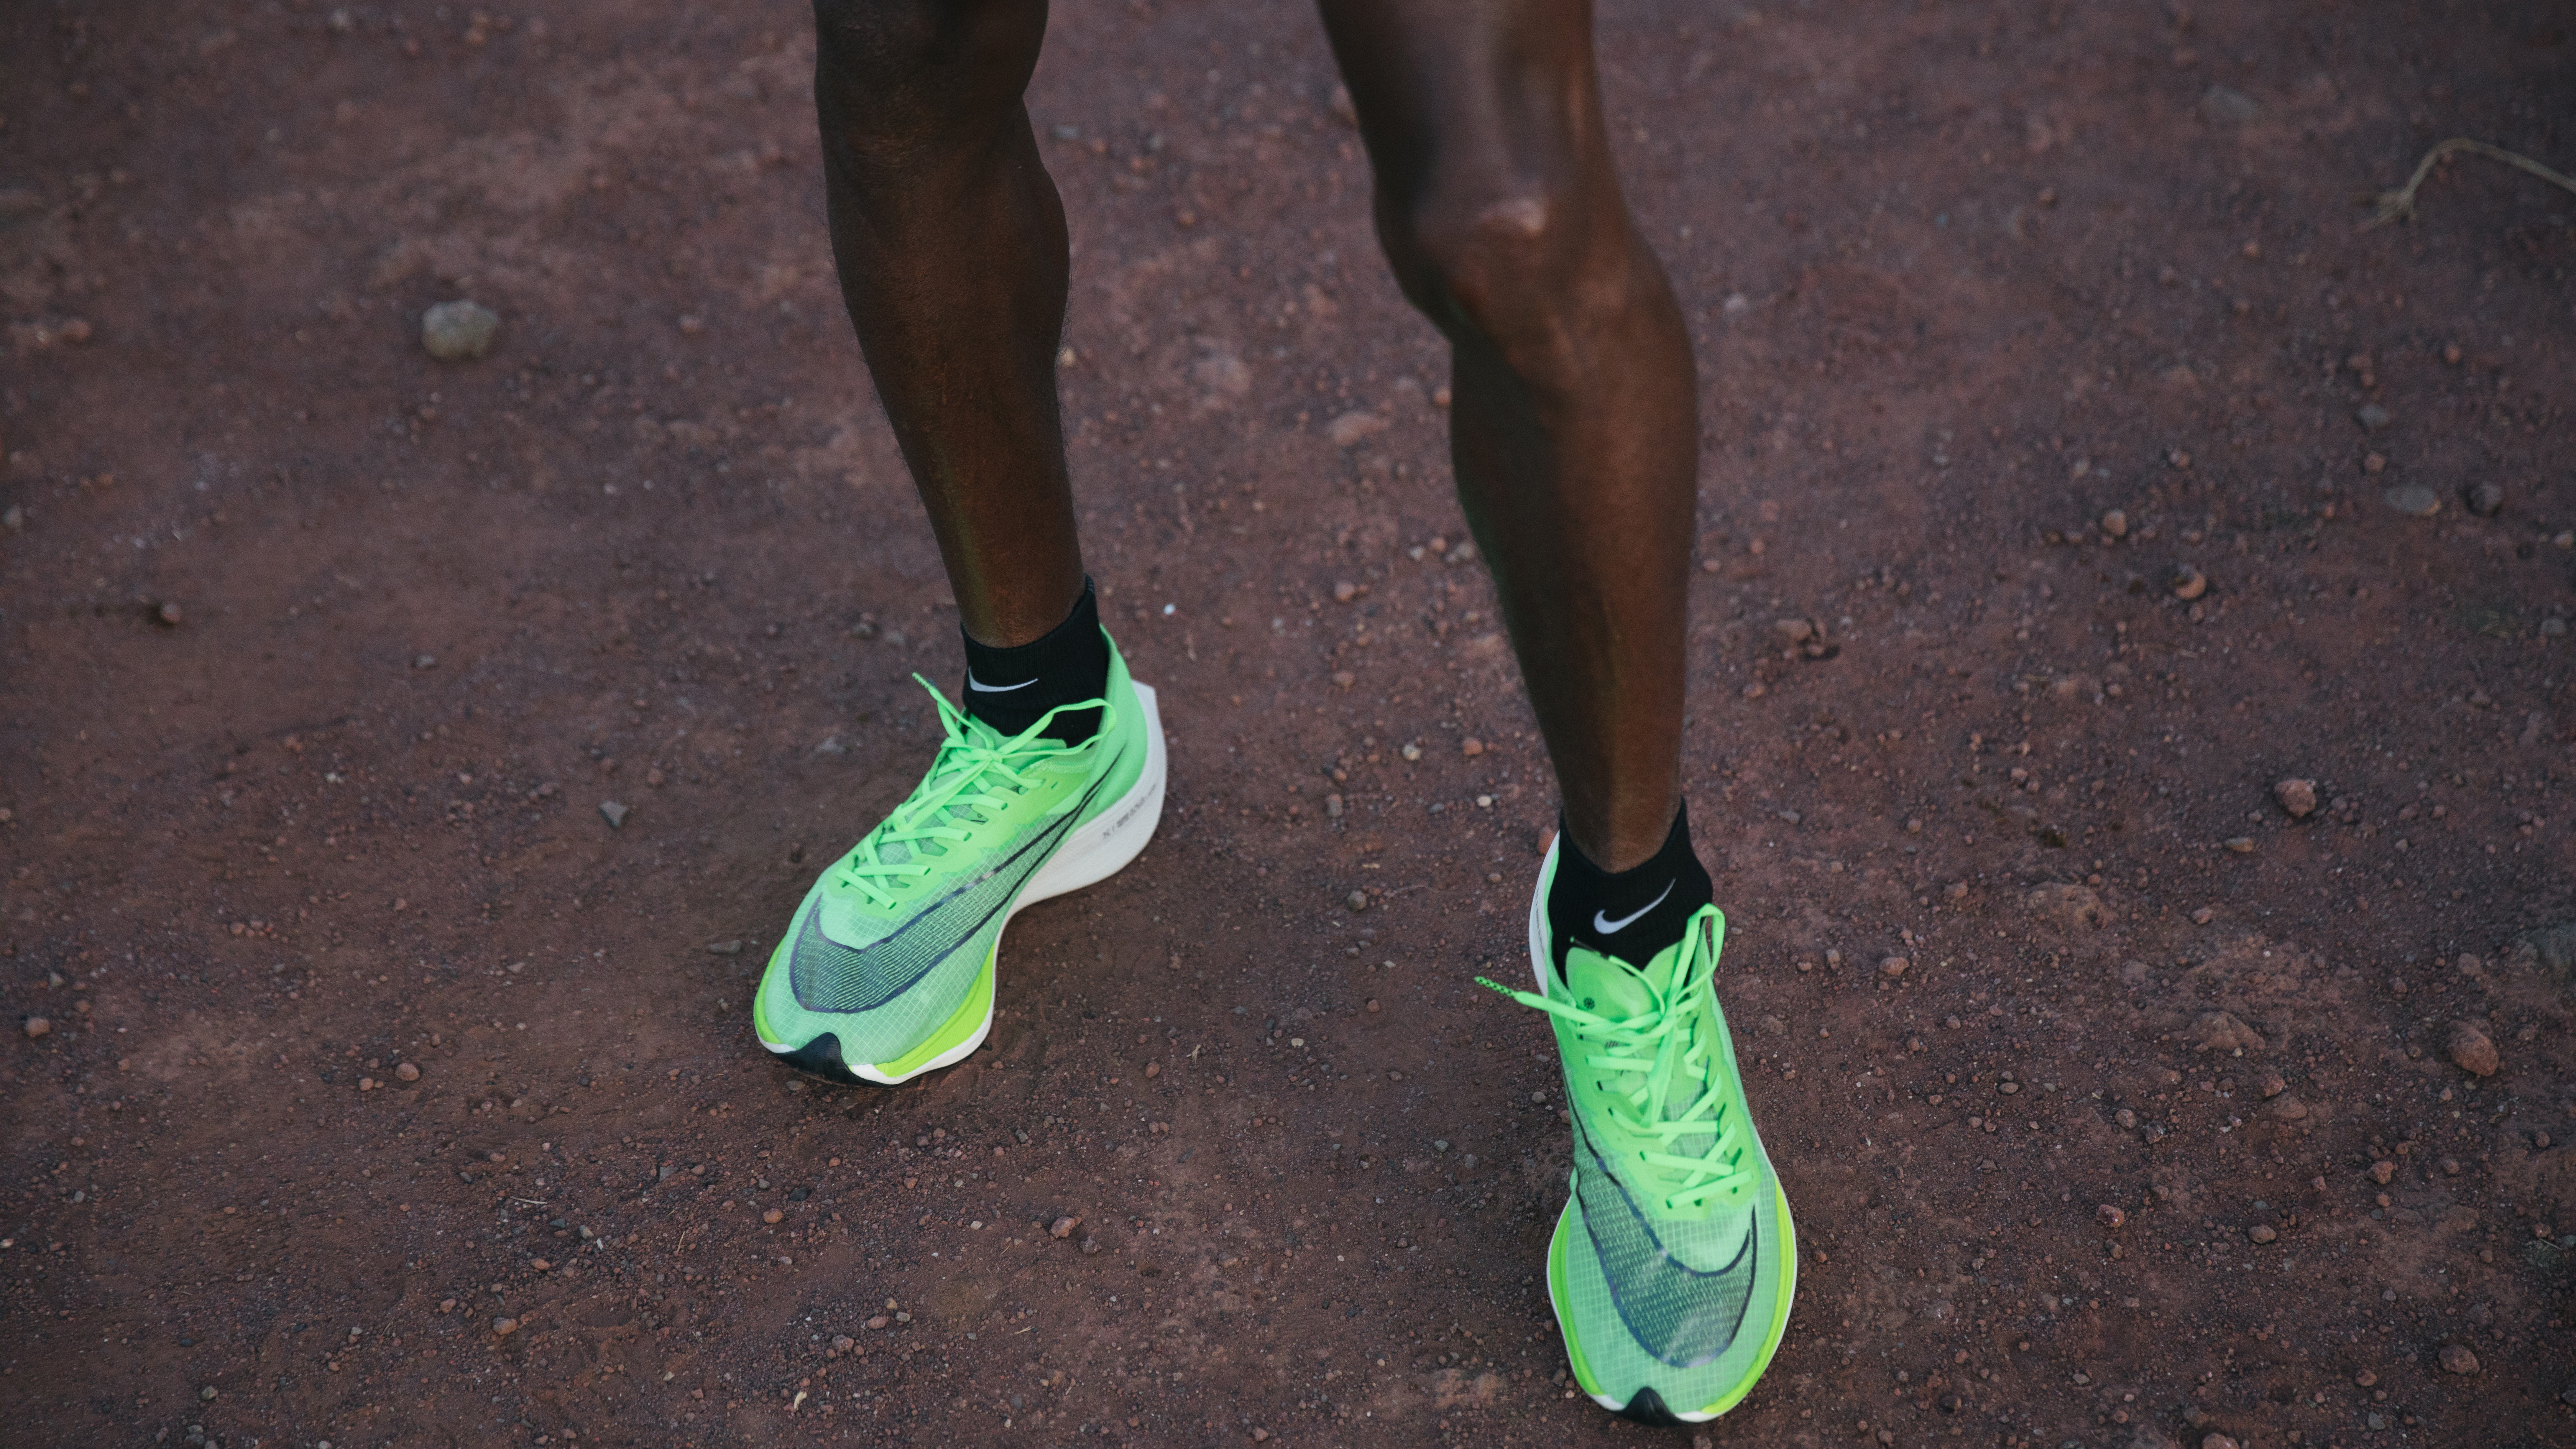 Nike ZoomX NEXT% Running Shoe Review: The Gold Standard Coach